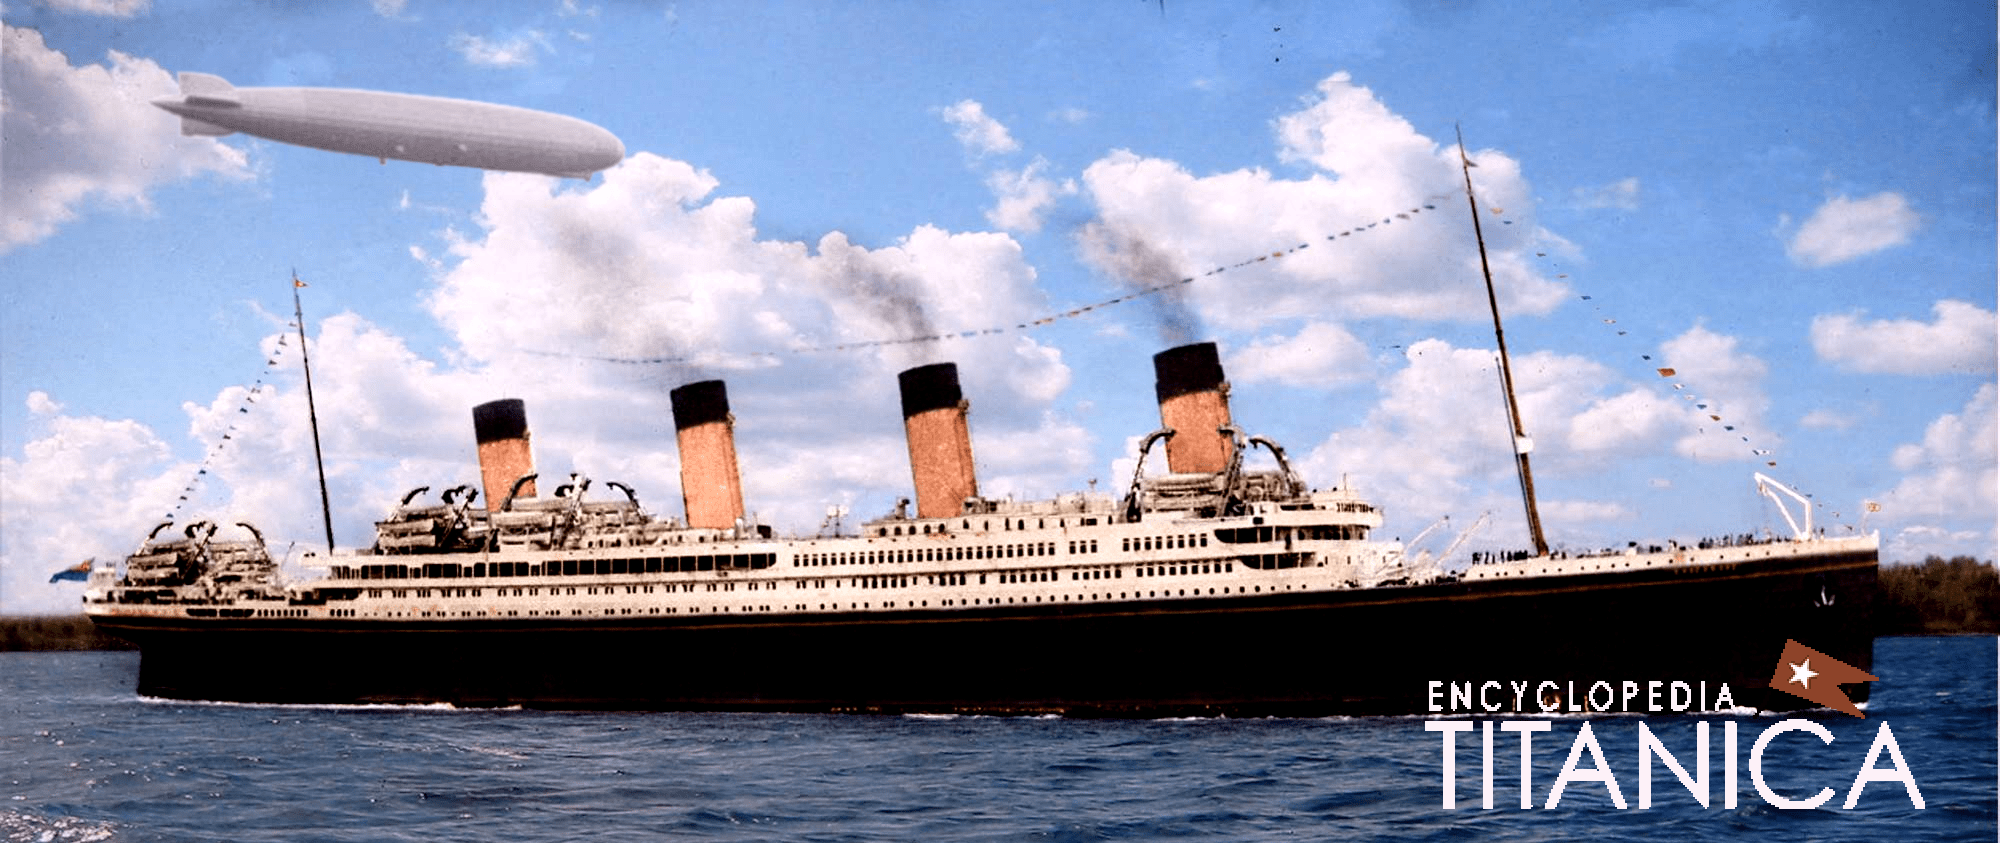 The RMS Britannic in color.